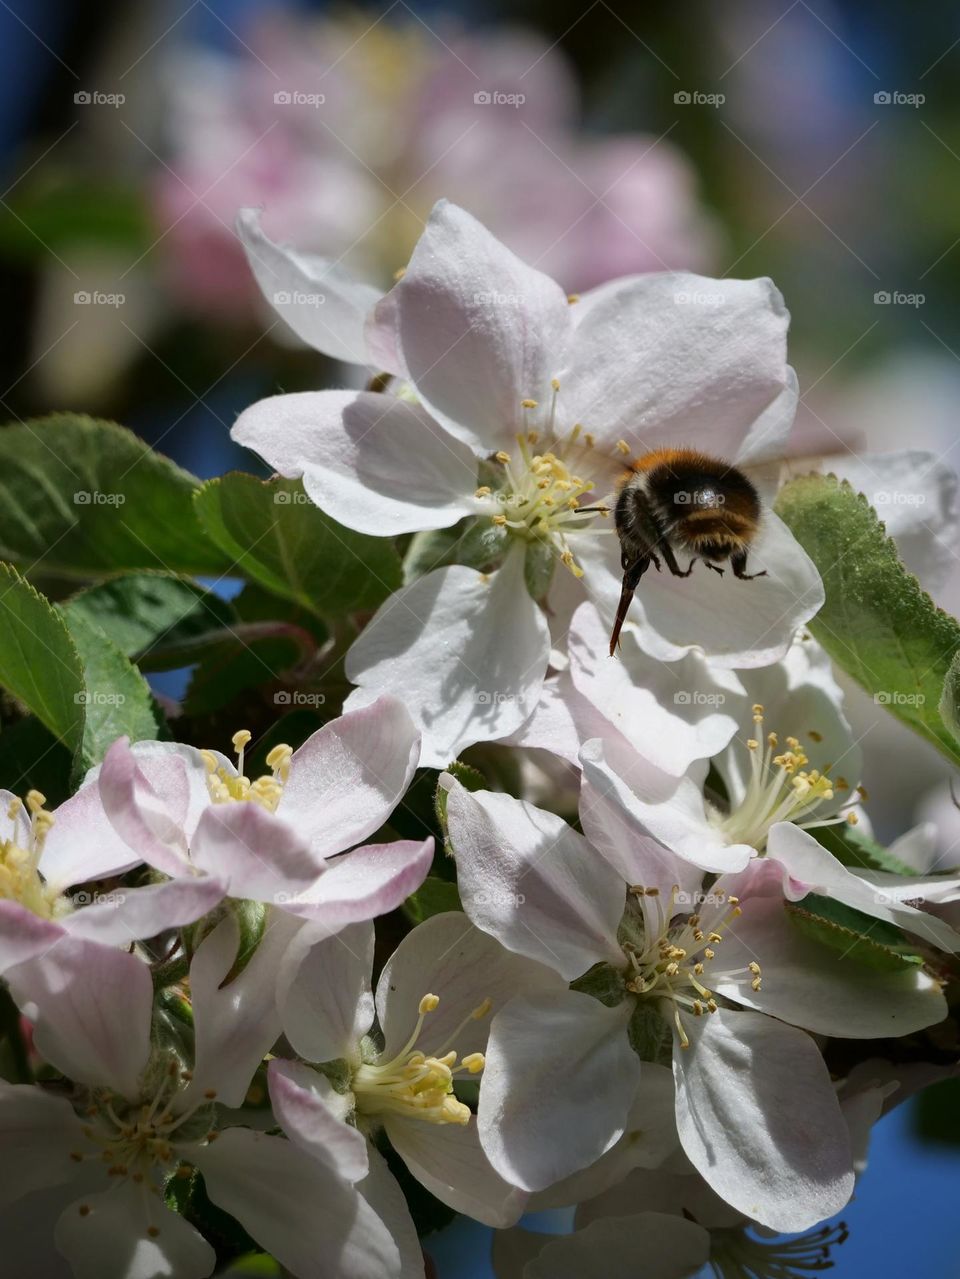 Flying bumblebee searching for nectar on apple tree blossoms